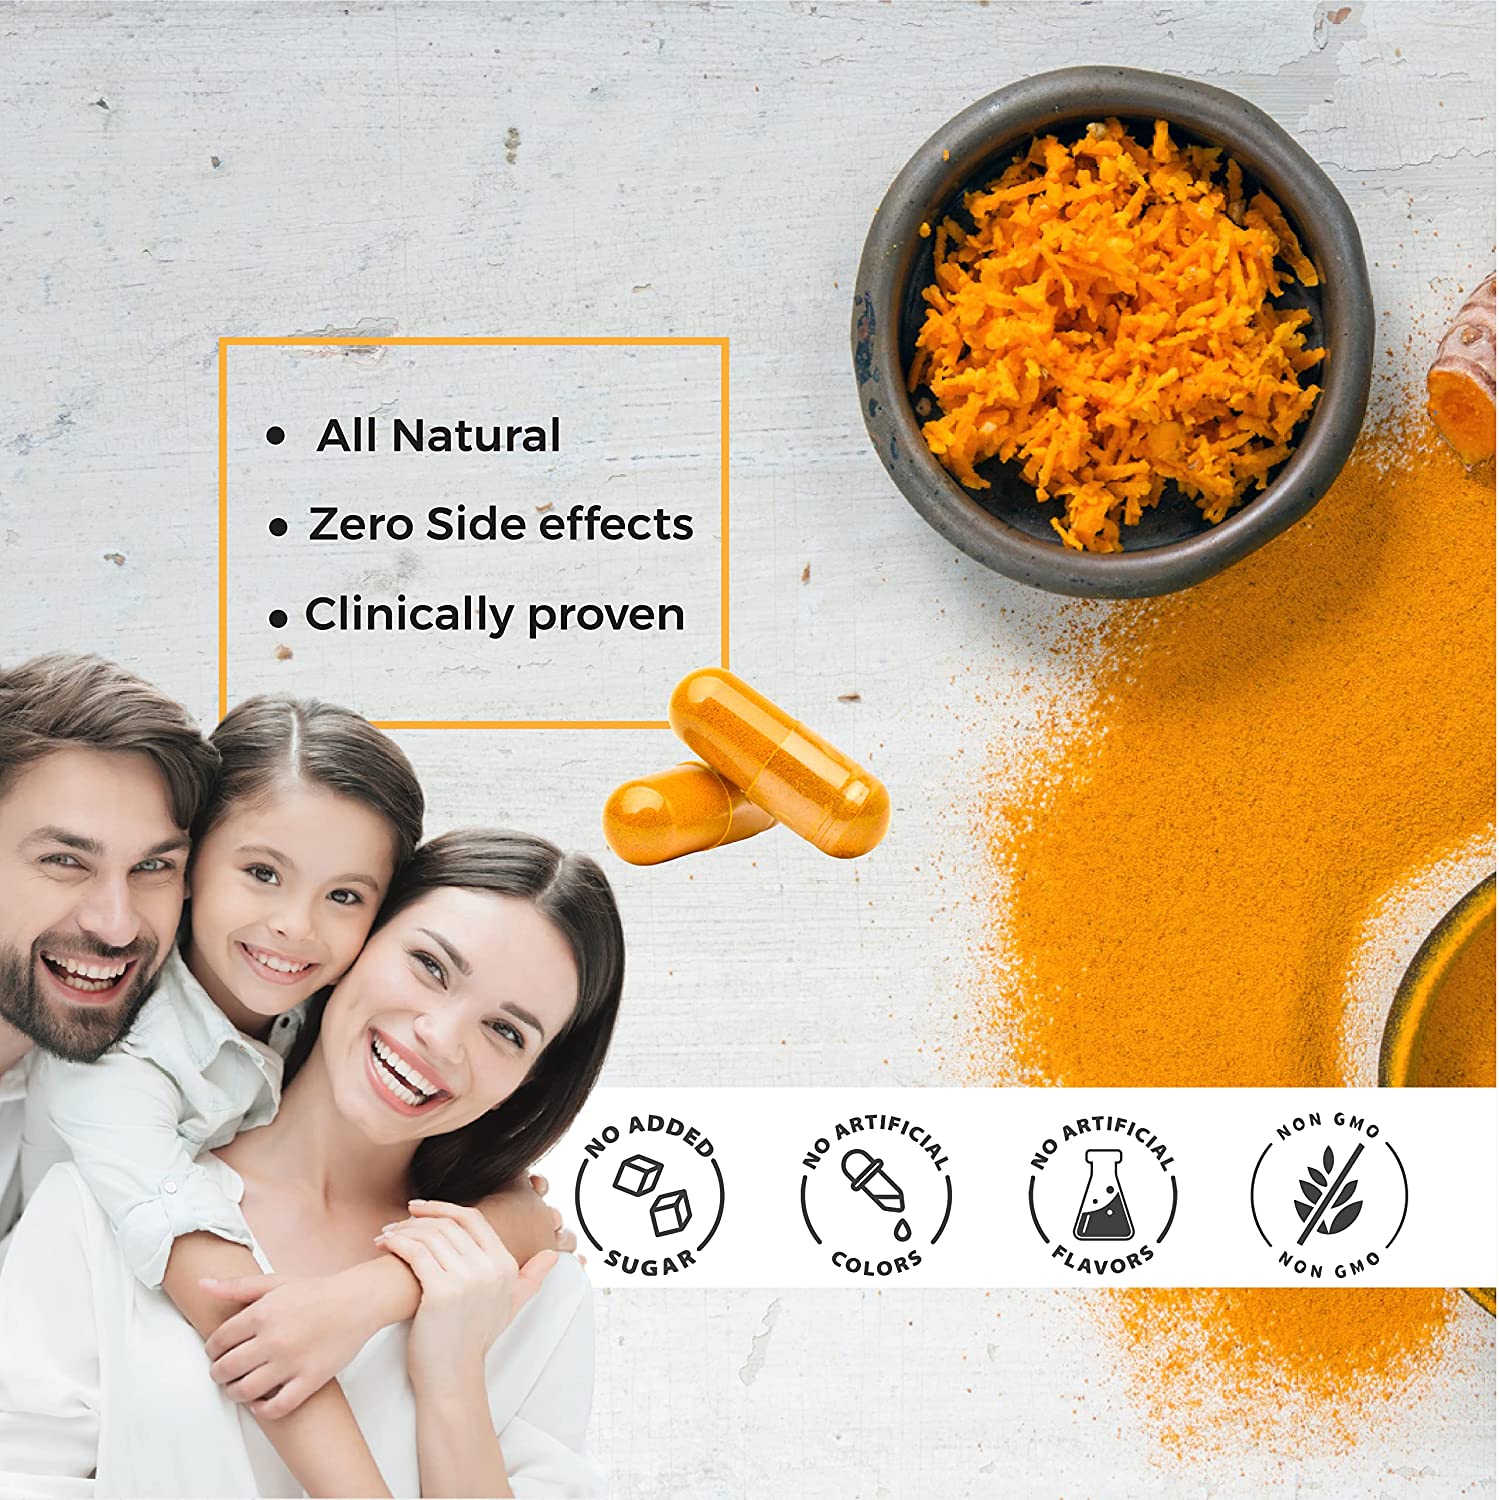 curcumin supplements made with no added sugar, and artificial colors with zero side effects